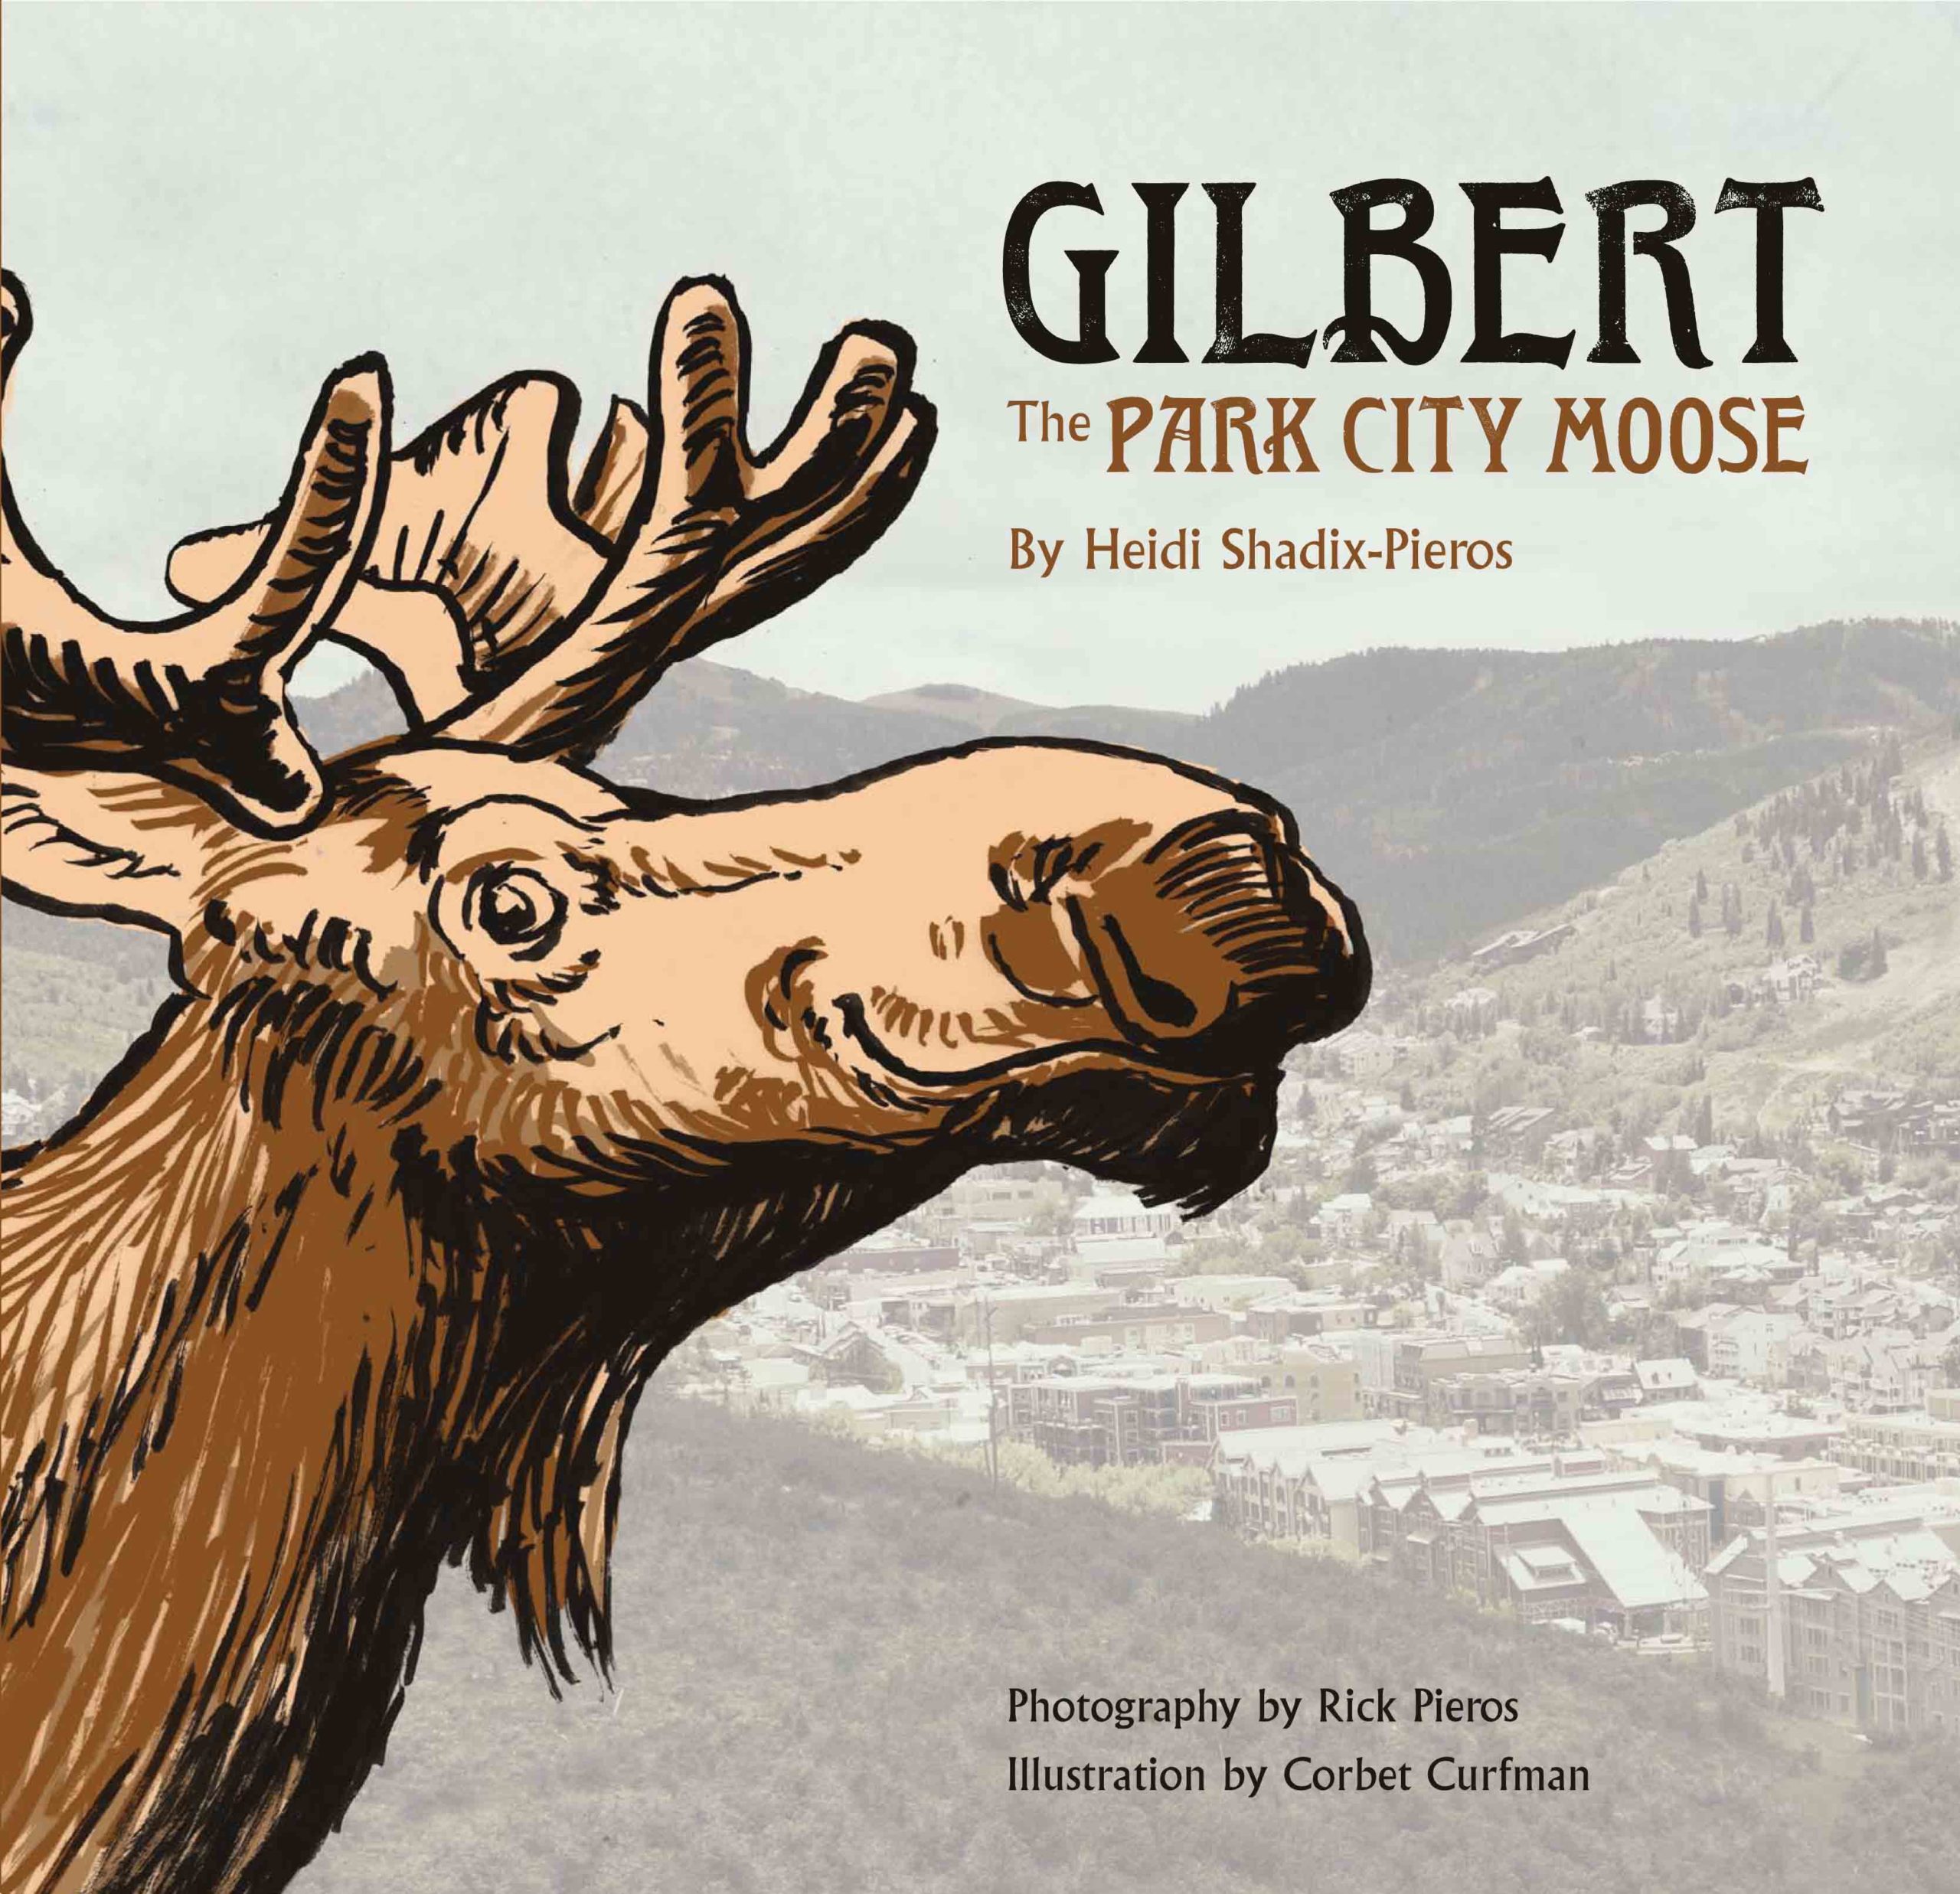 Gilbert The Park City Moose Front scaled